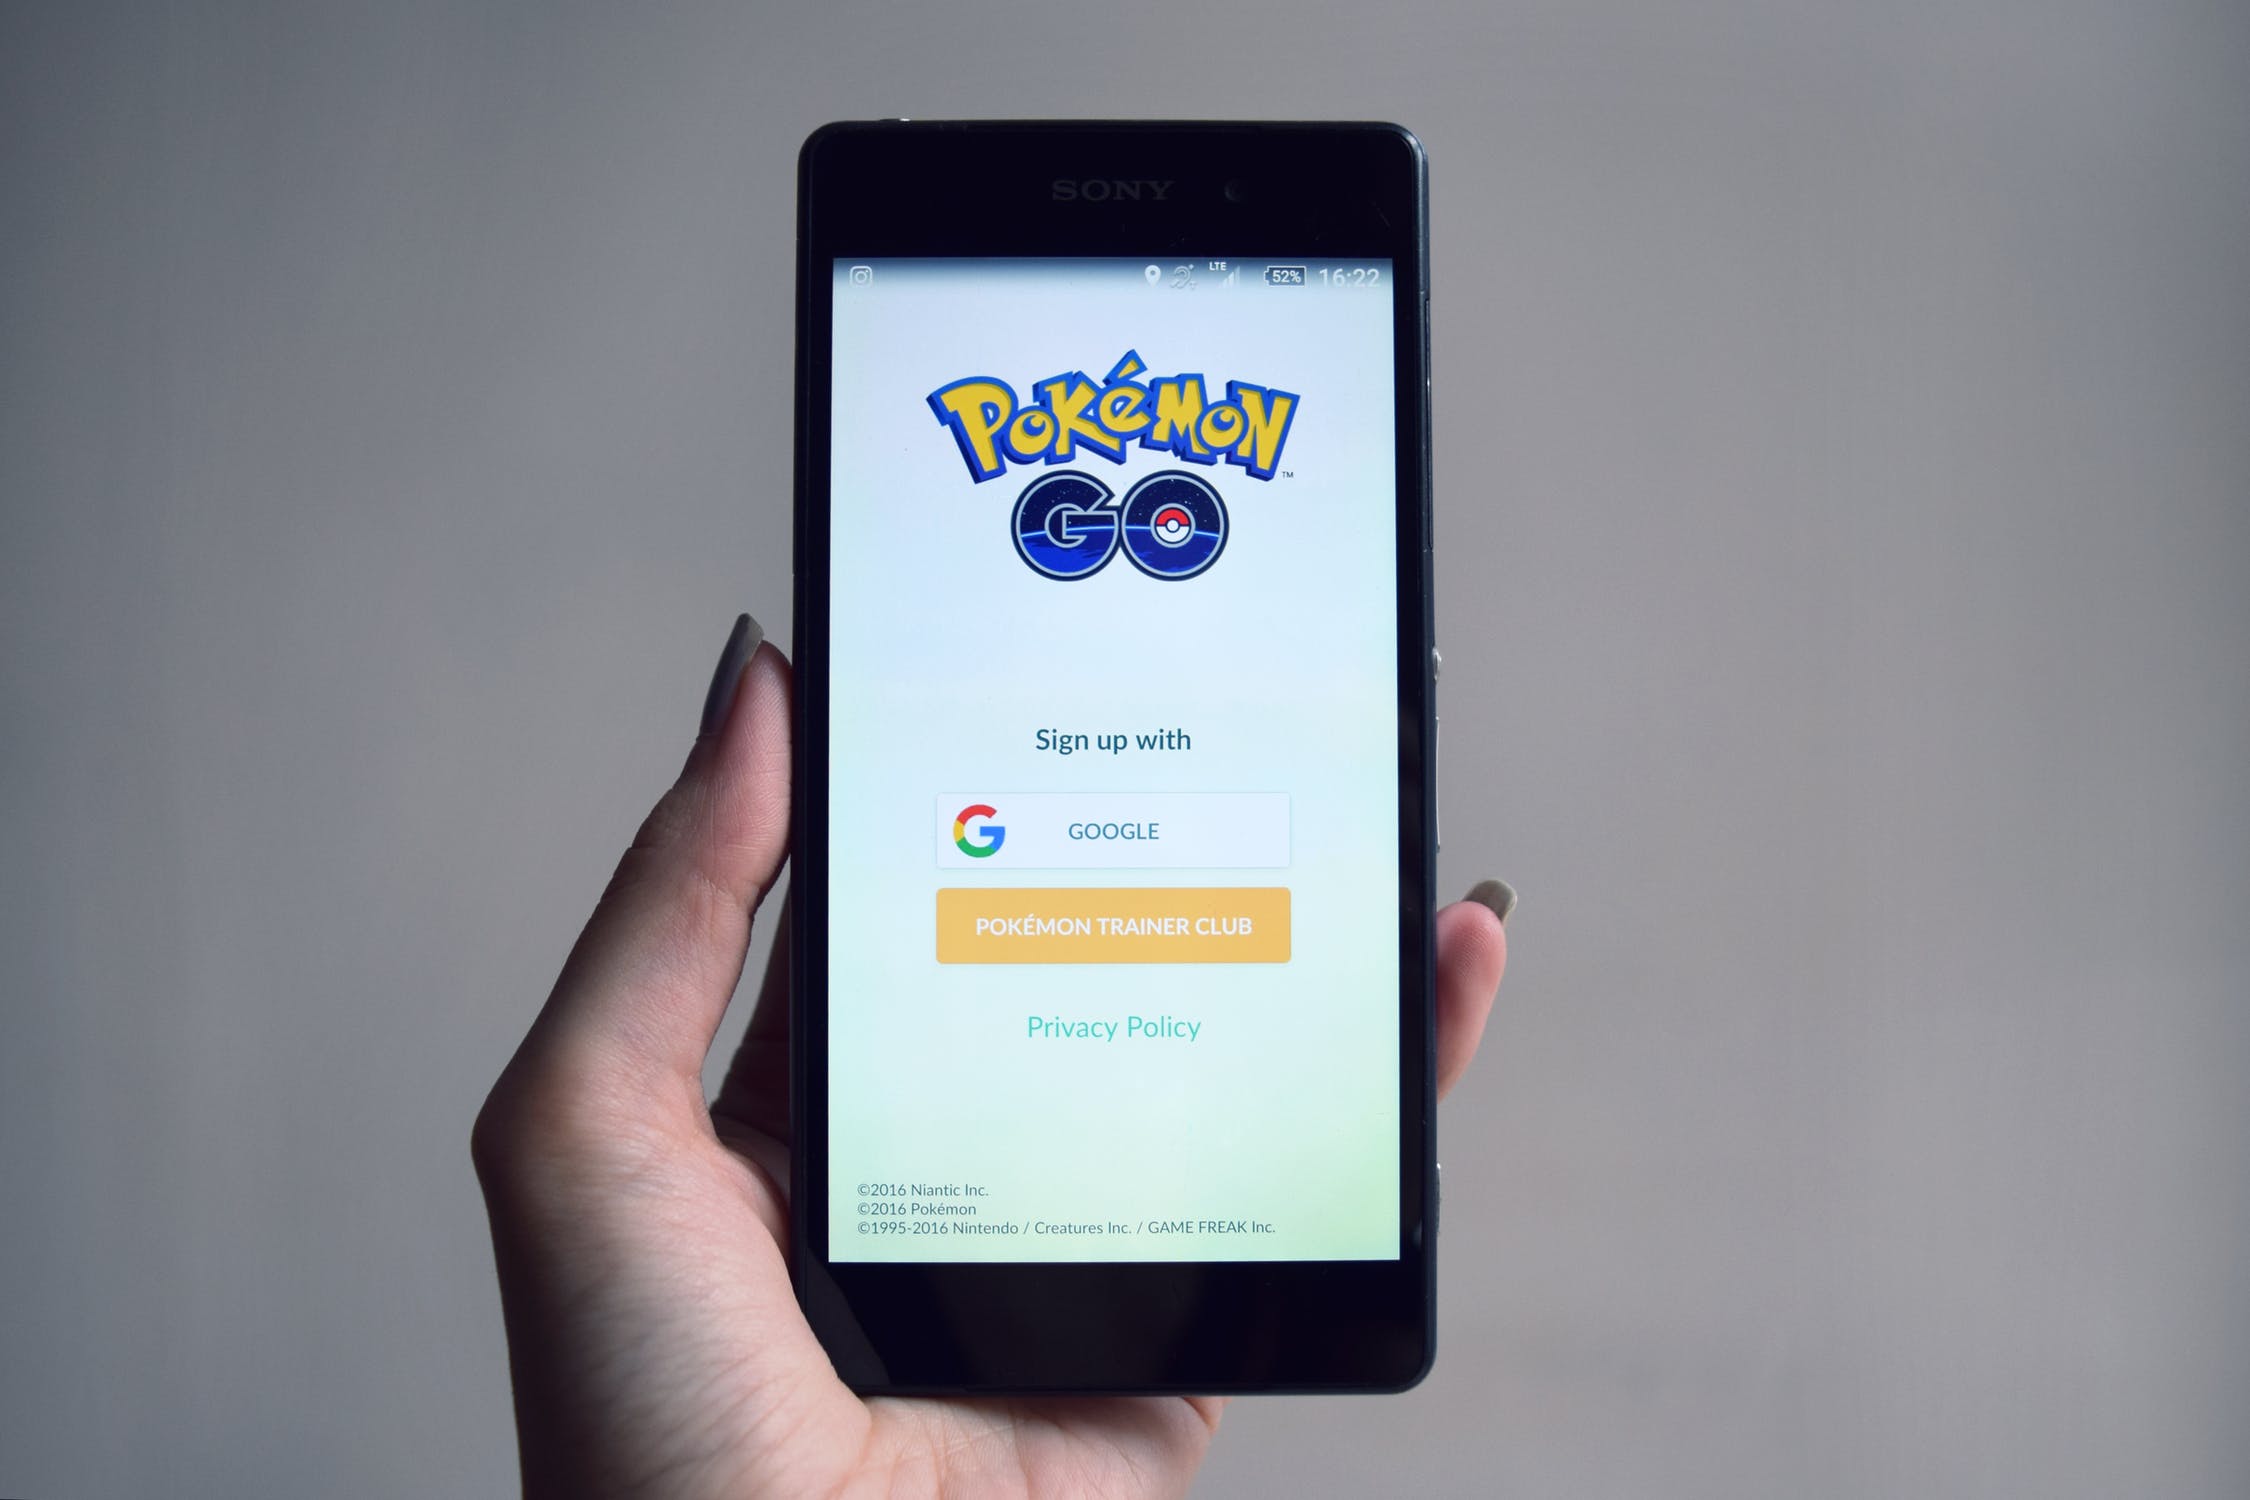 How to Use Pokémon Go in Your Training